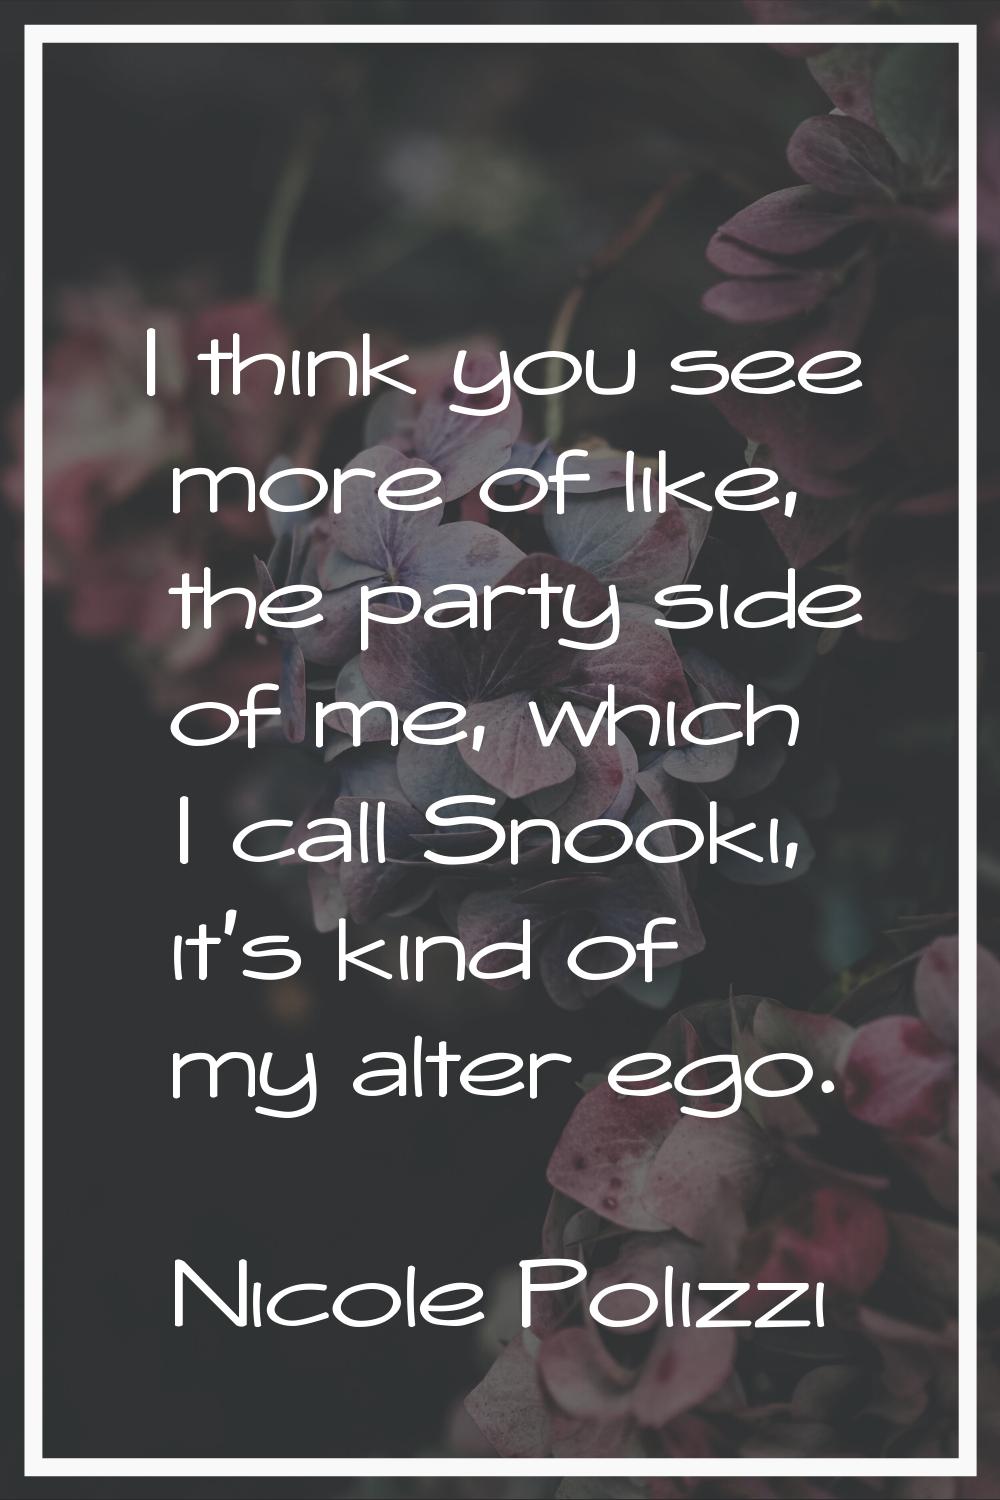 I think you see more of like, the party side of me, which I call Snooki, it's kind of my alter ego.